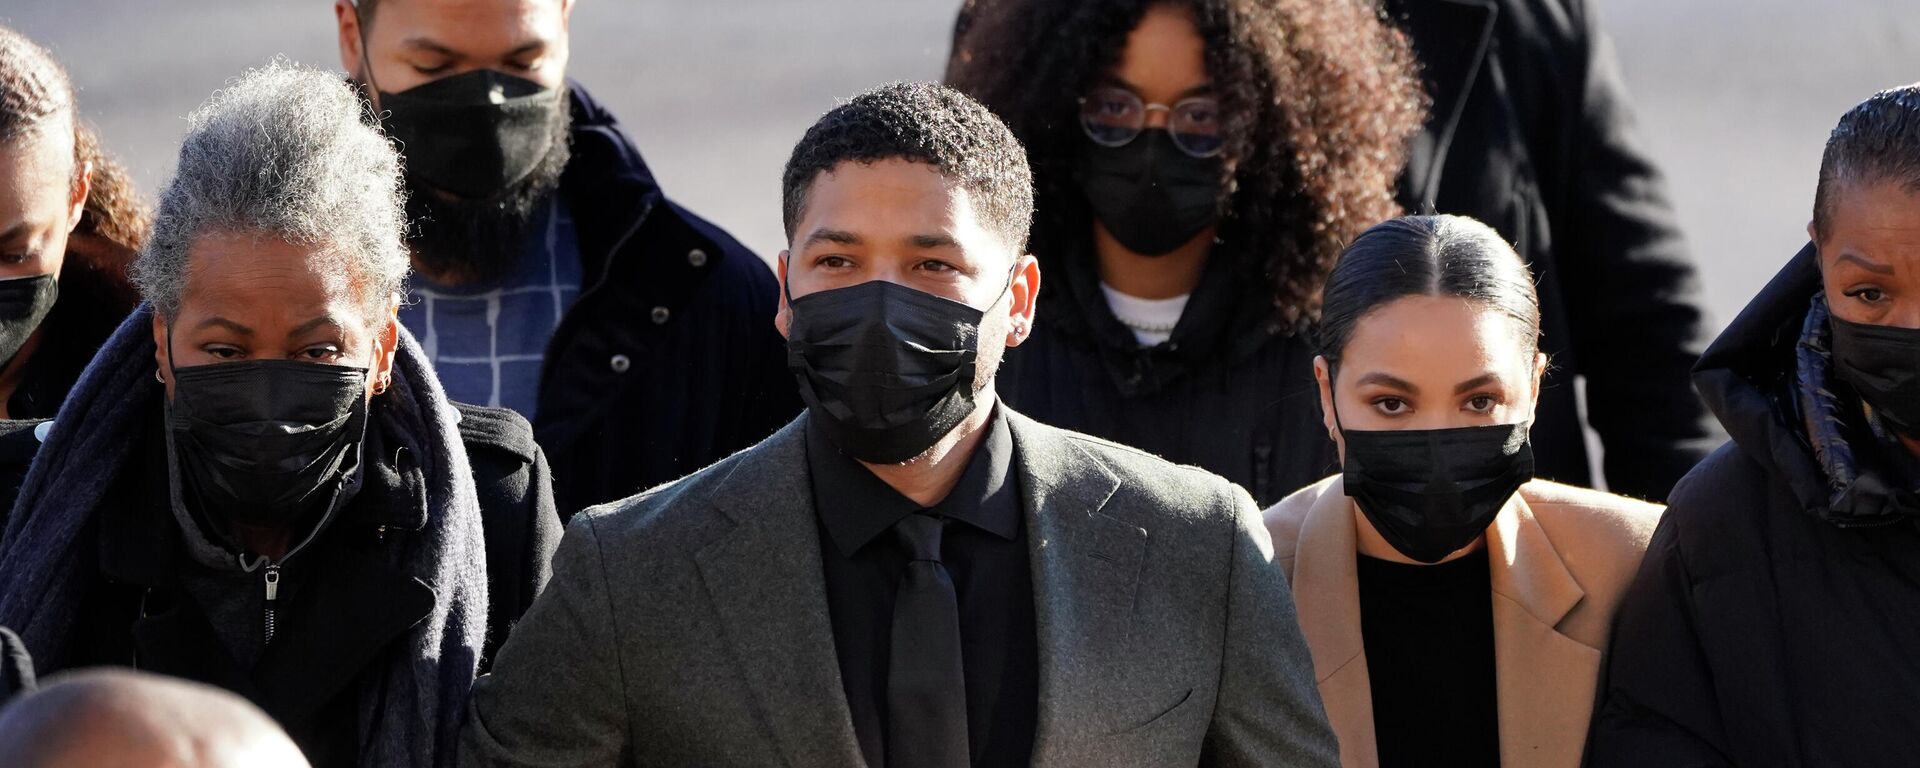 Actor Jussie Smollett, center, arrives Tuesday, Nov. 30, 2021, at the Leighton Criminal Courthouse for day two of his trial in Chicago. - Sputnik International, 1920, 01.12.2021